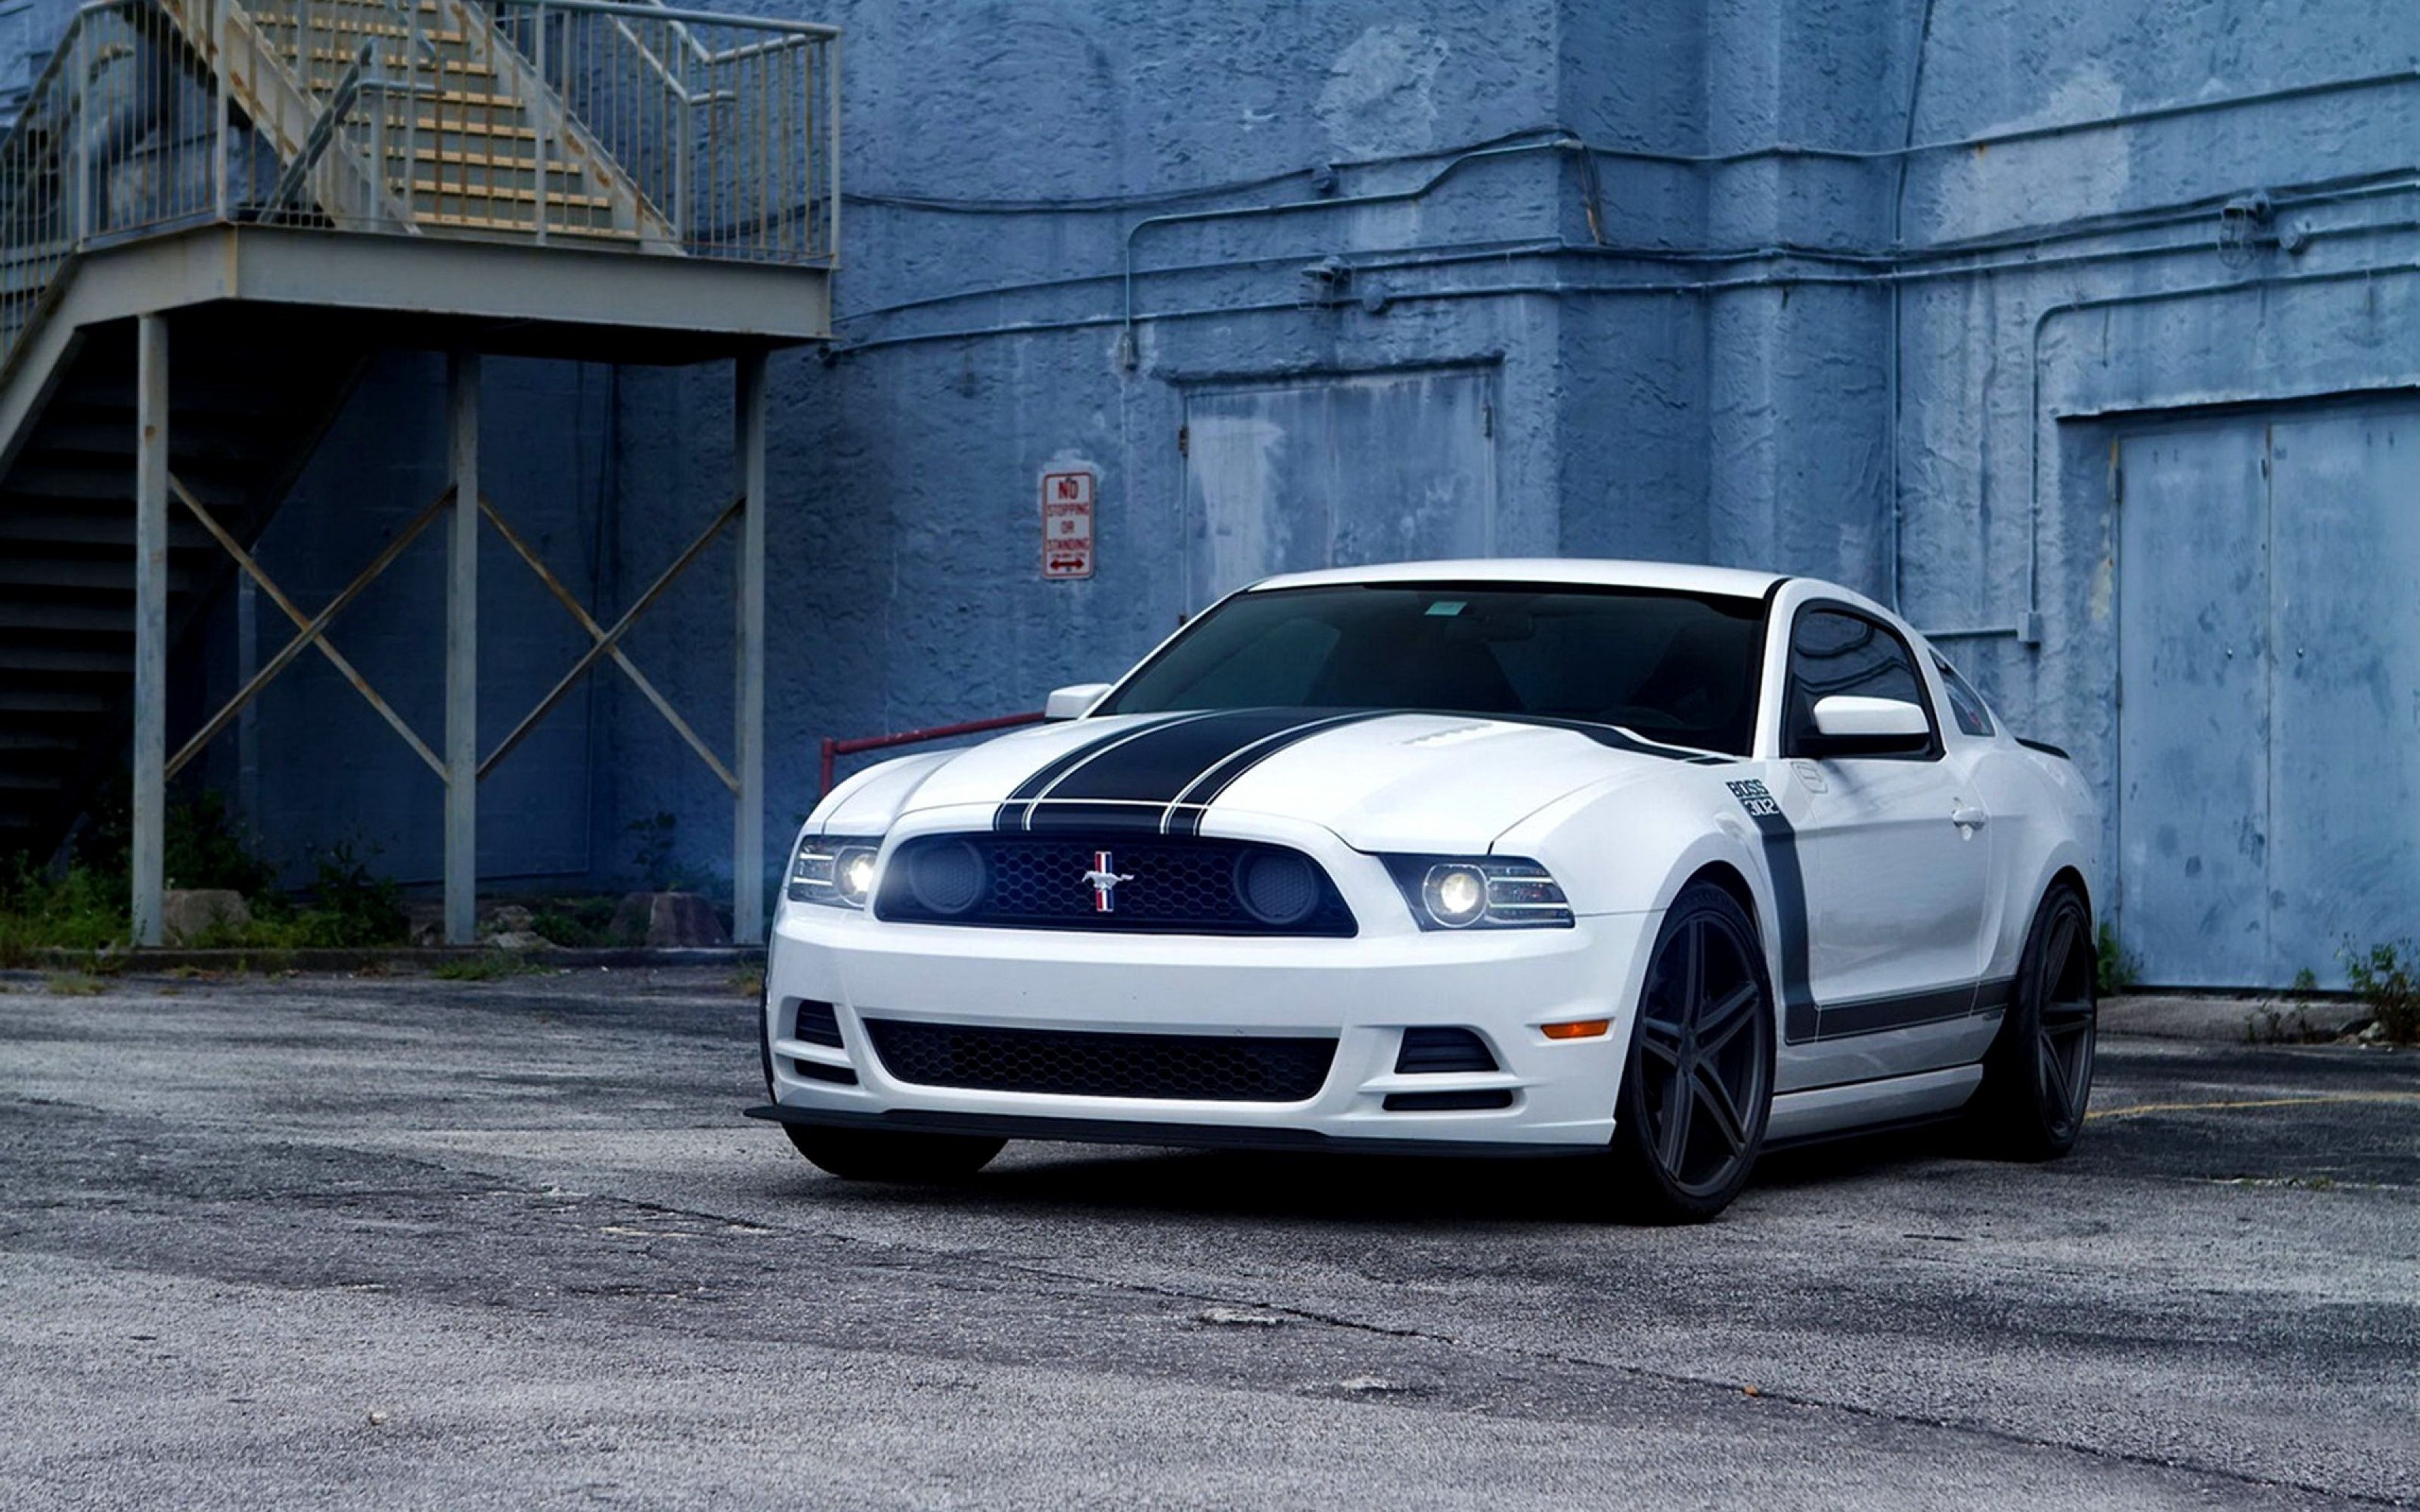 Free download 3840x2400 Wallpaper ford mustang muscle car boss 302 white style [3840x2400] for your Desktop, Mobile & Tablet. Explore Mustang 4K Wallpaper. P 51 Mustang Wallpaper, Ford Mustang